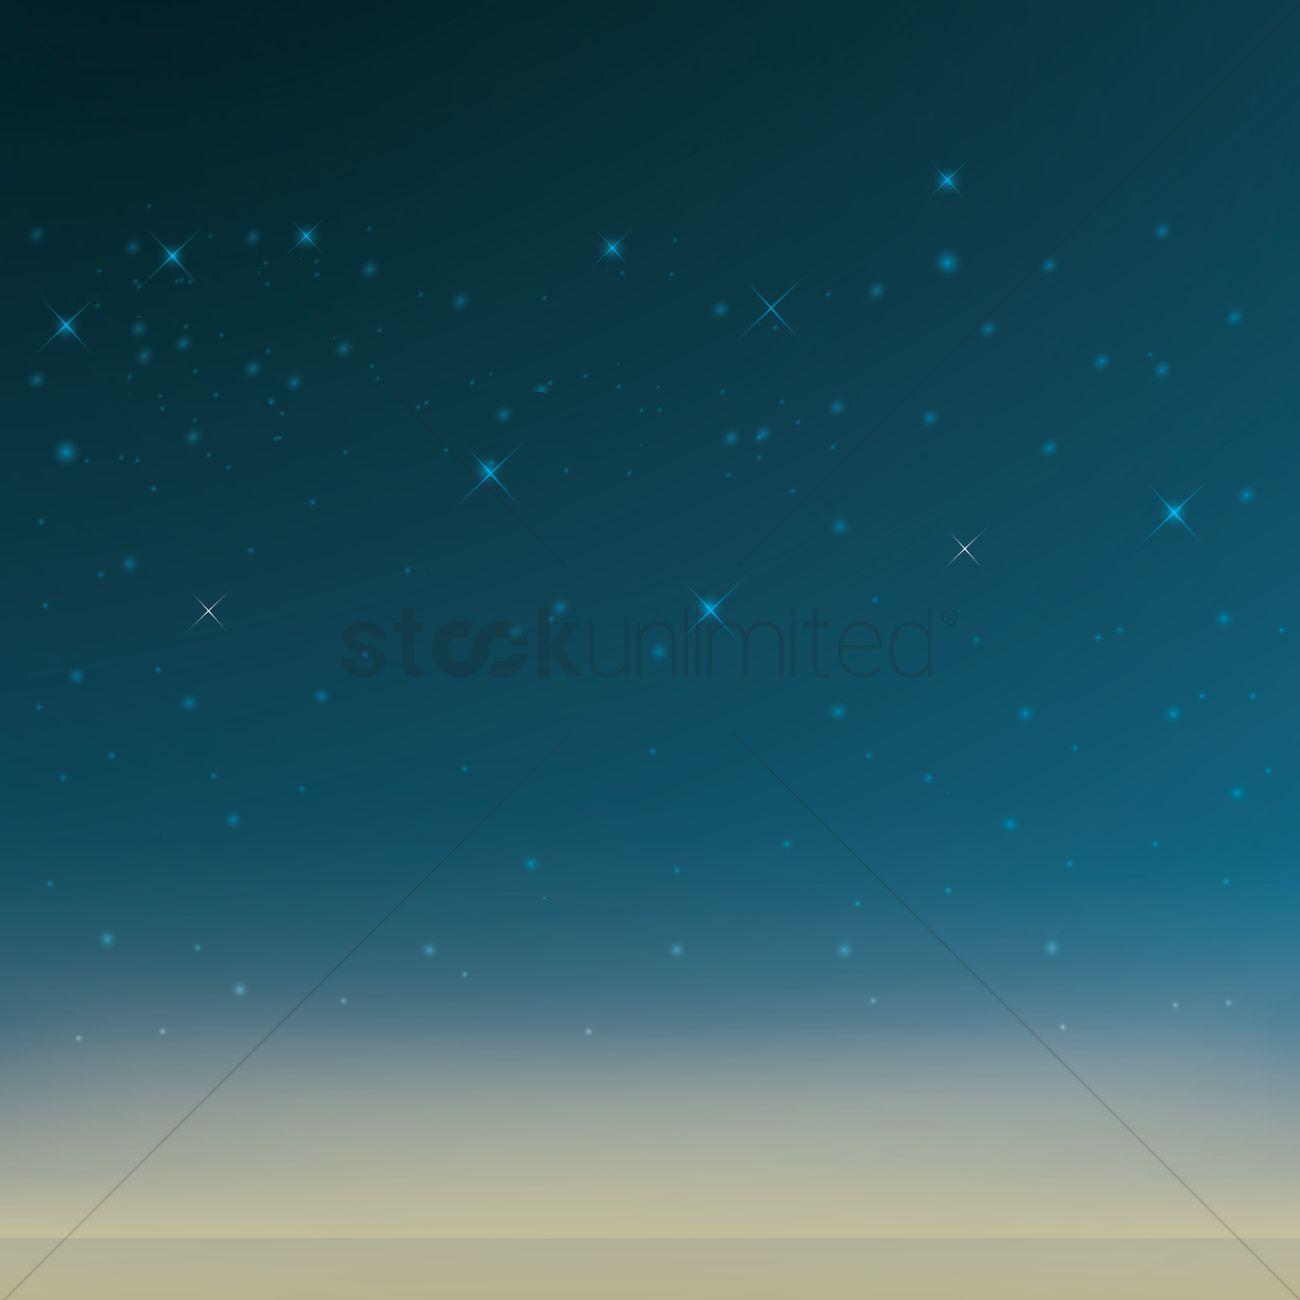 Starry night background Vector Image